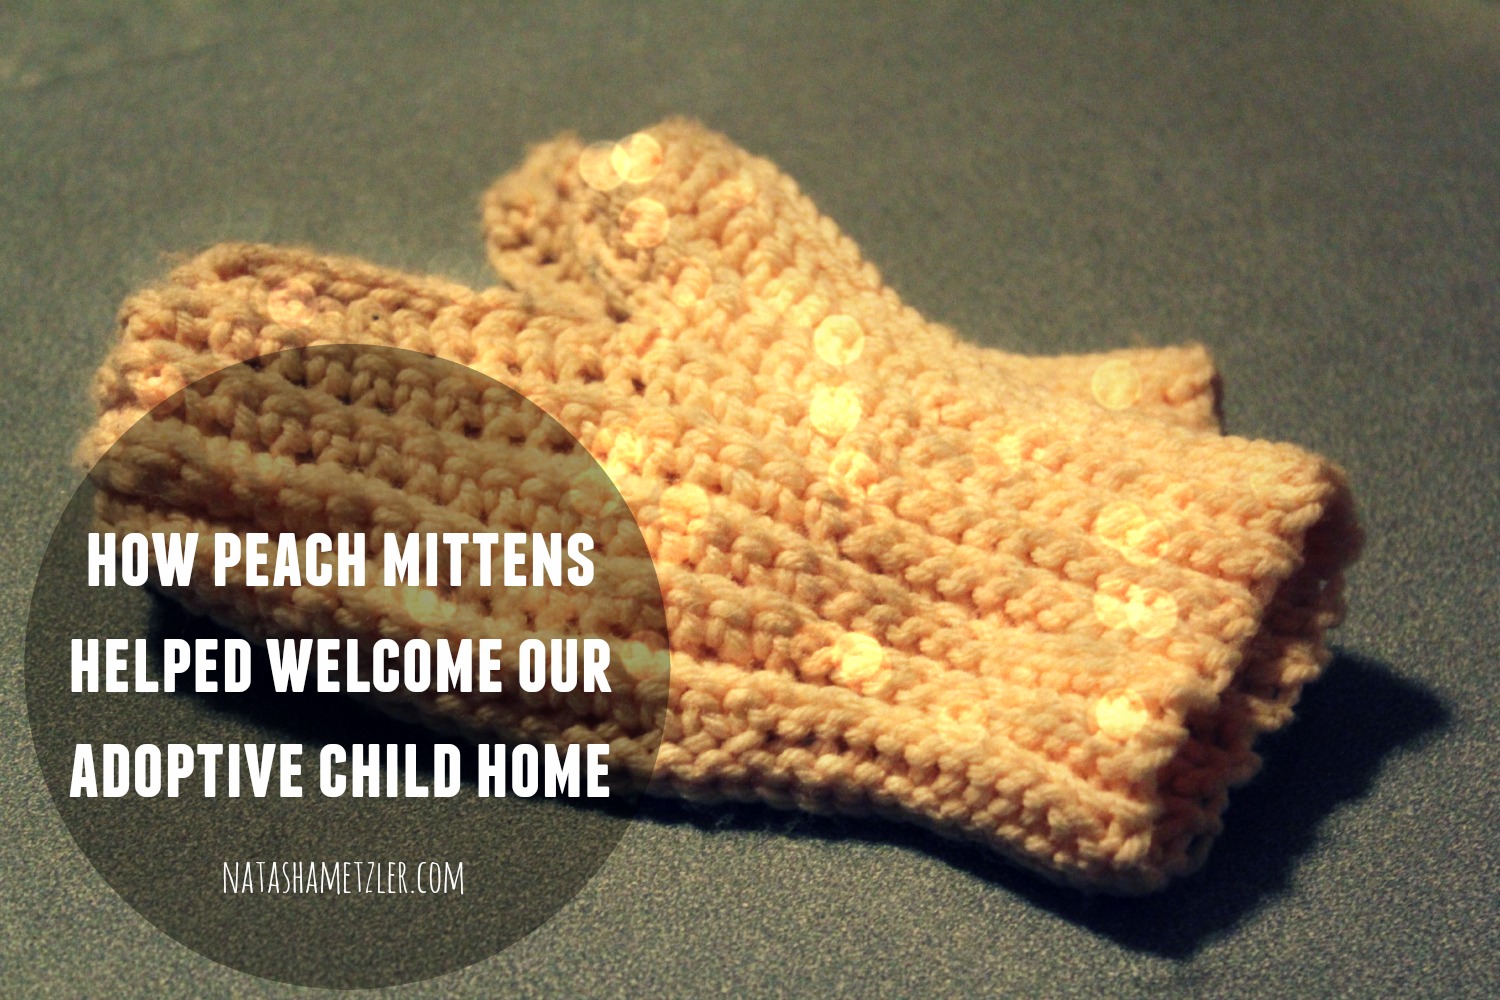 How Peach Mittens Helped Welcome Our Adoptive Child Home